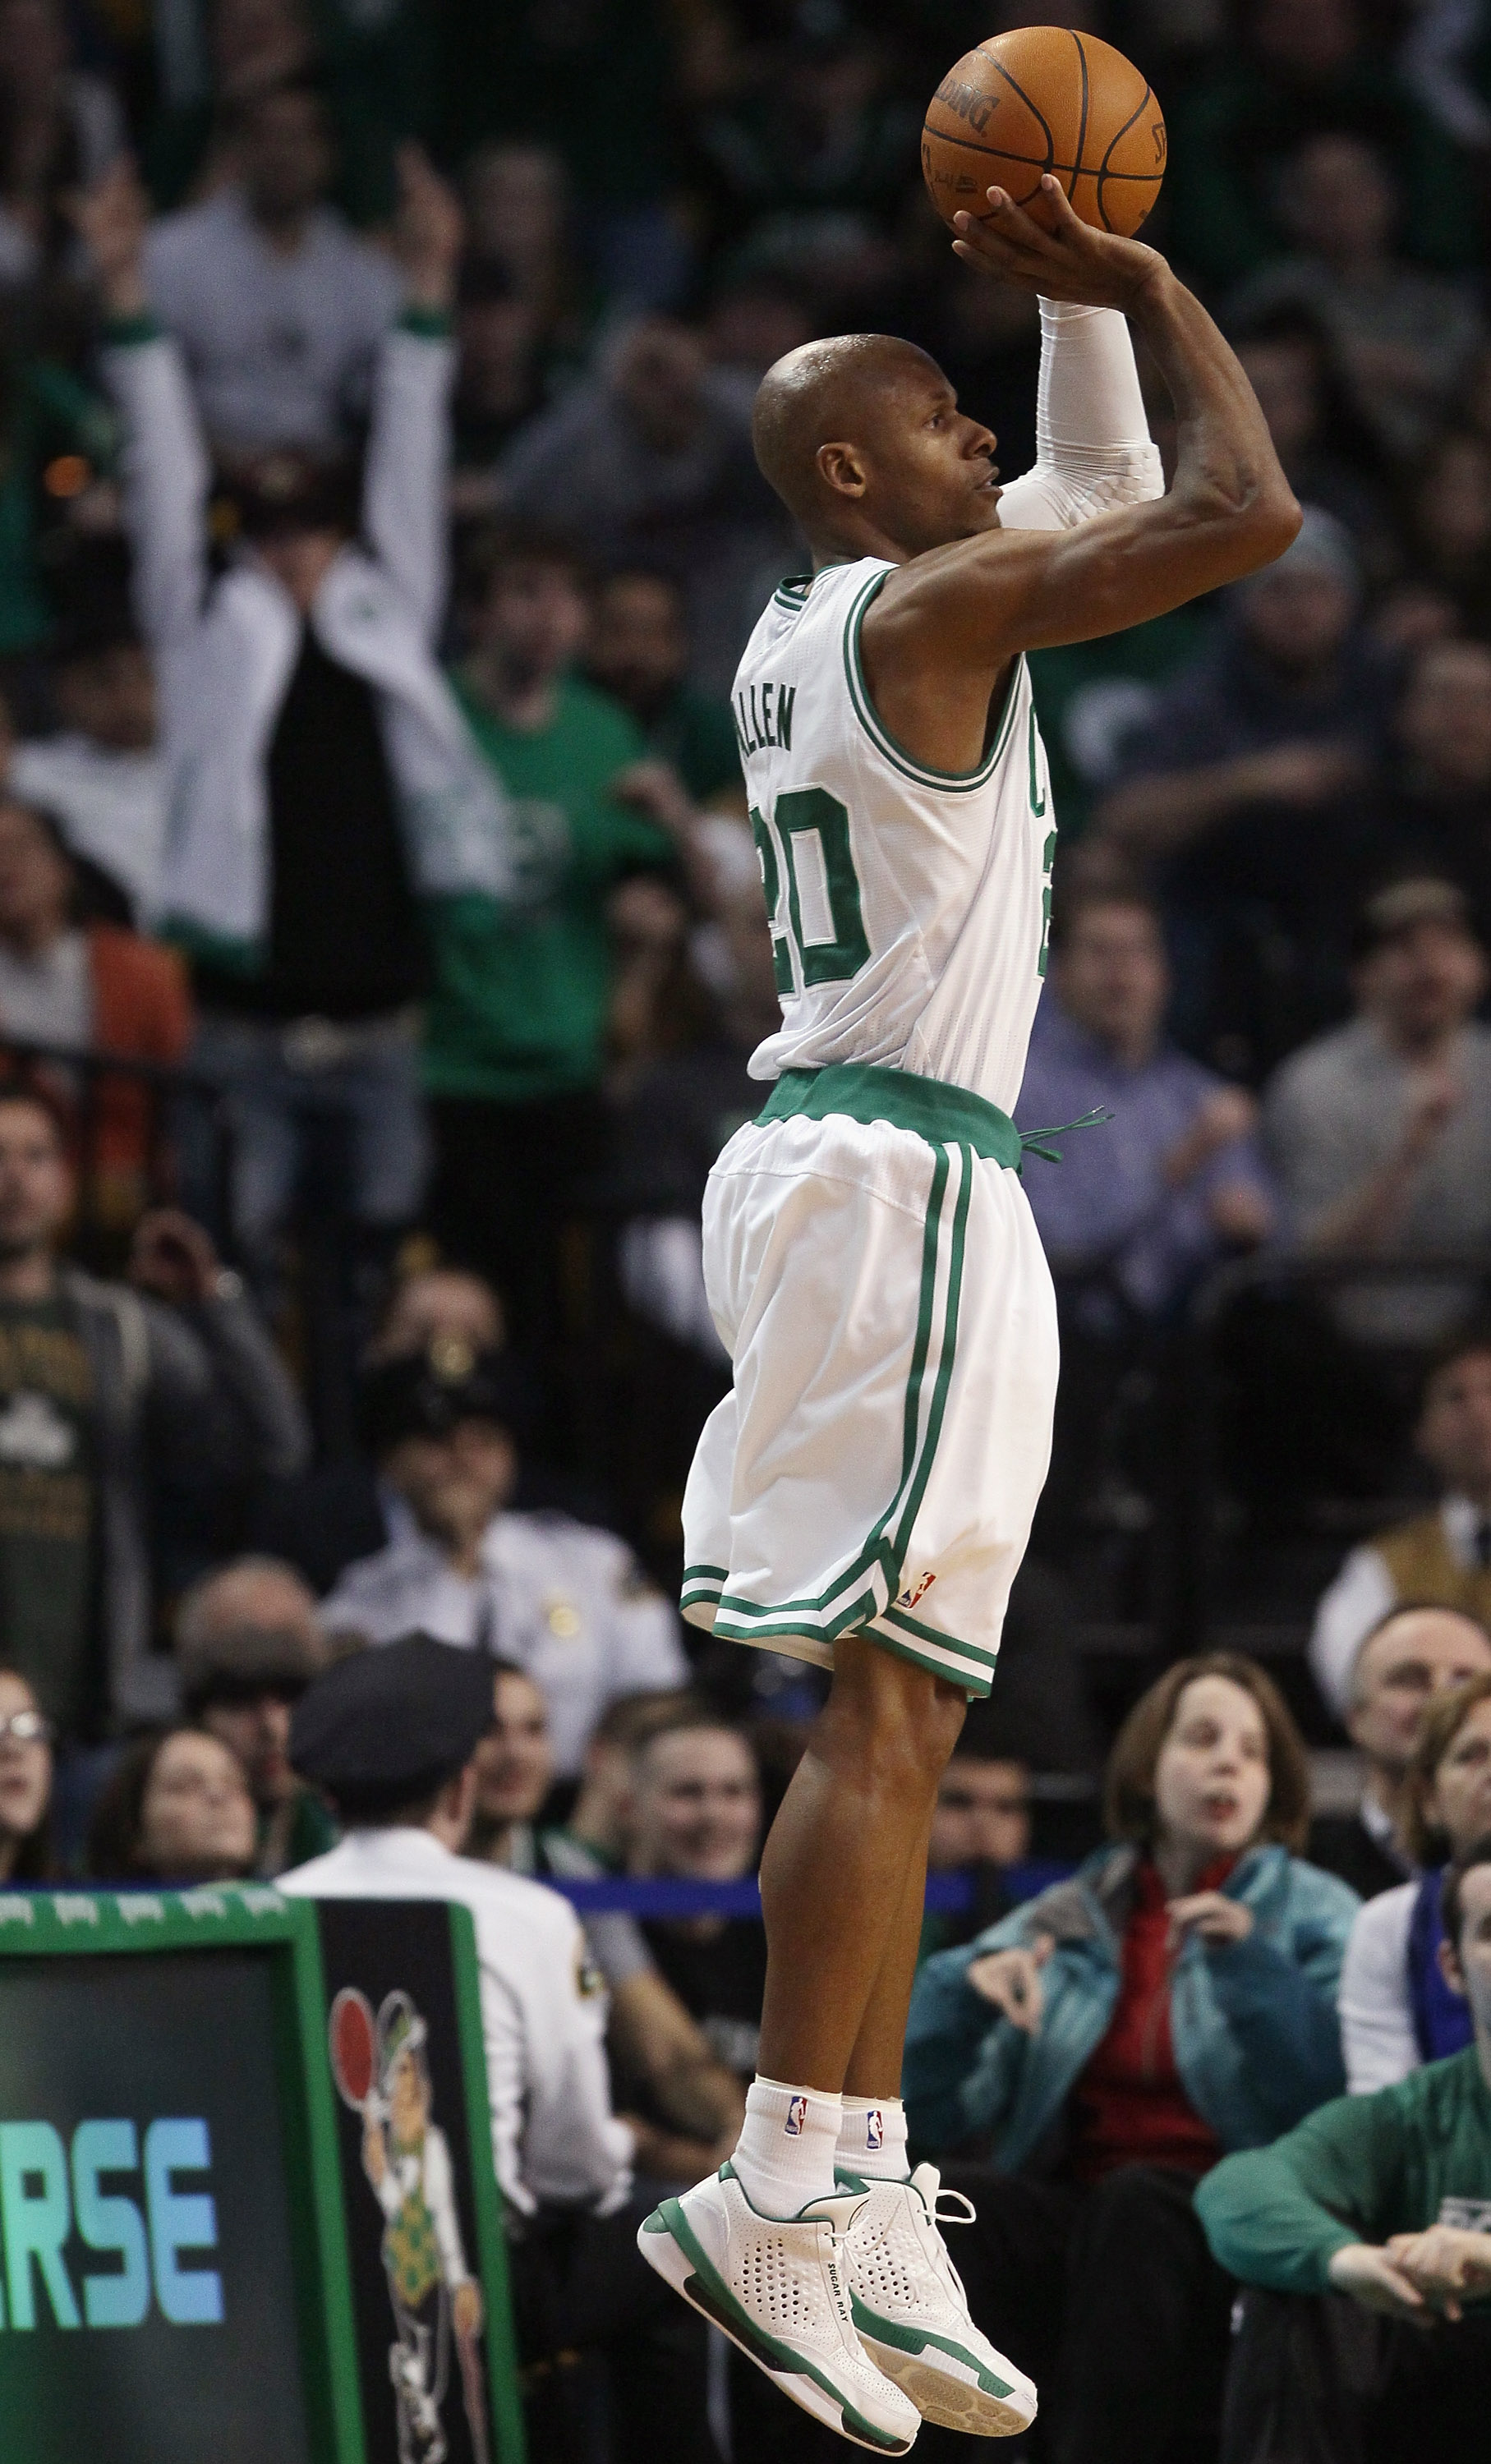 Are the Boston Celtics shooting too many 3-pointers?